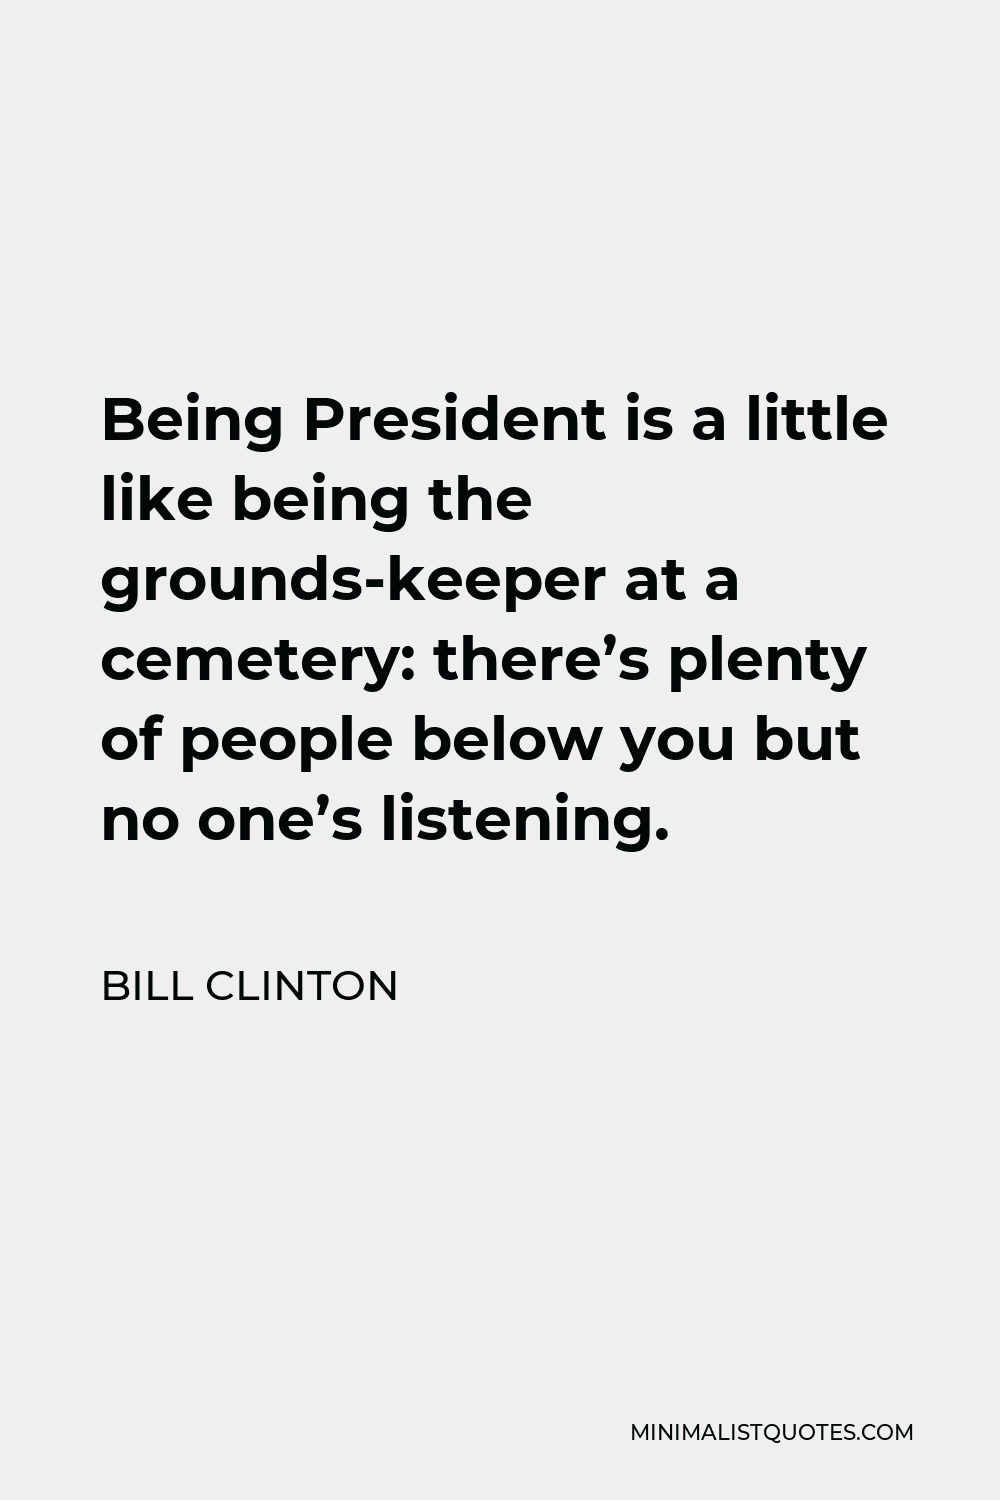 Bill Clinton Quote - Being President is a little like being the grounds-keeper at a cemetery: there’s plenty of people below you but no one’s listening.